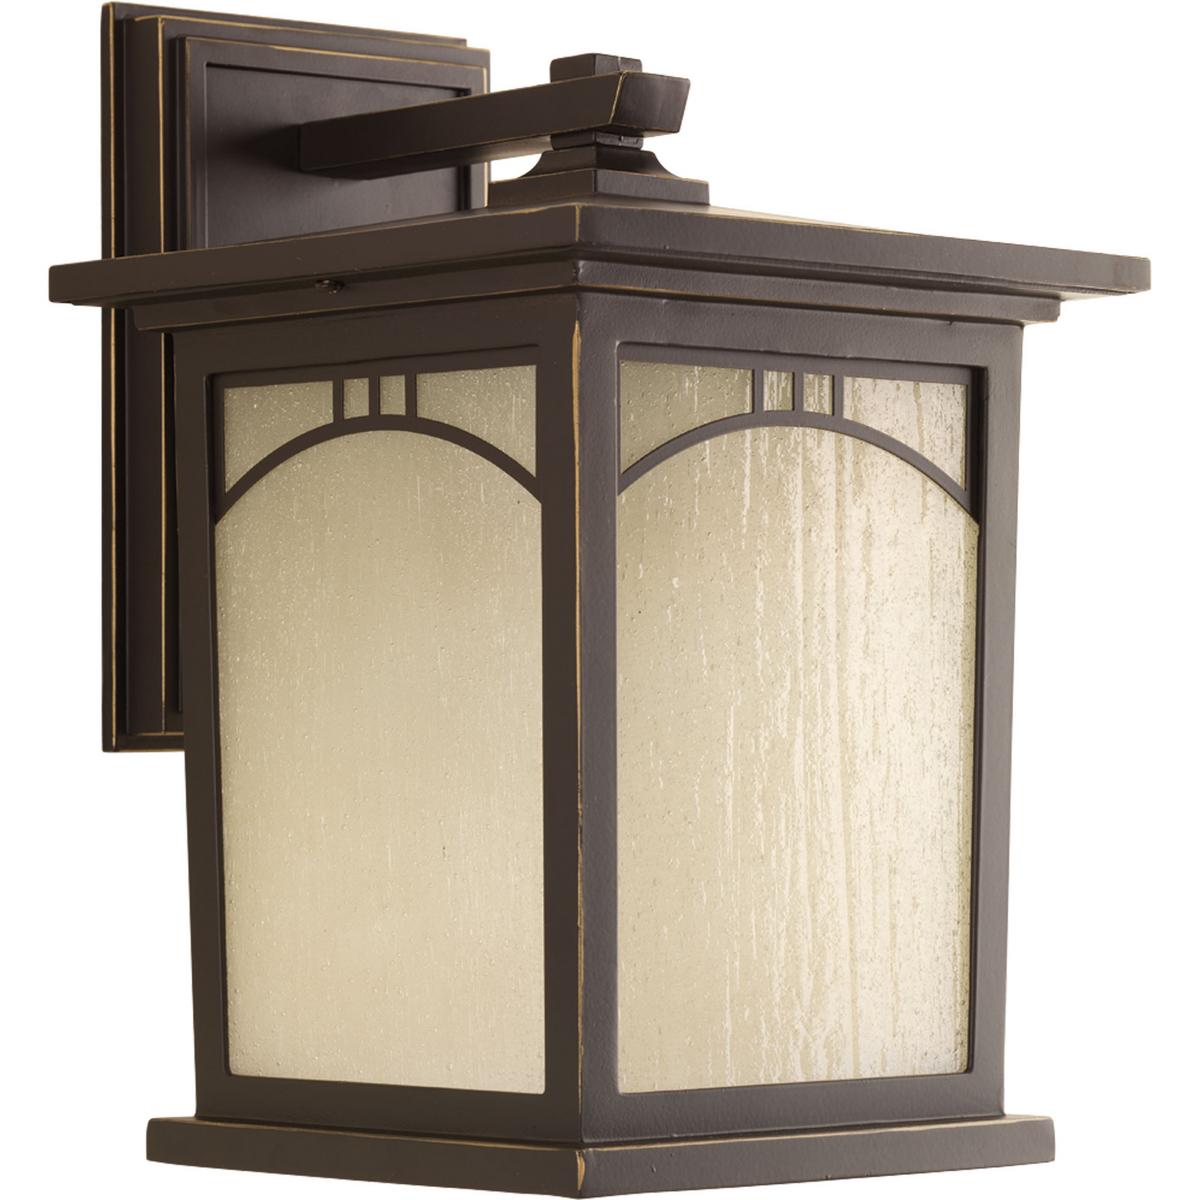 Hubbell P6053-20 Outdoor one-light medium wall lantern with geometric details, umber textured art glass, and an Antique Bronze finish.  ; Antique bronze finish. ; Umber textured art glass panels. ; Geometric details.